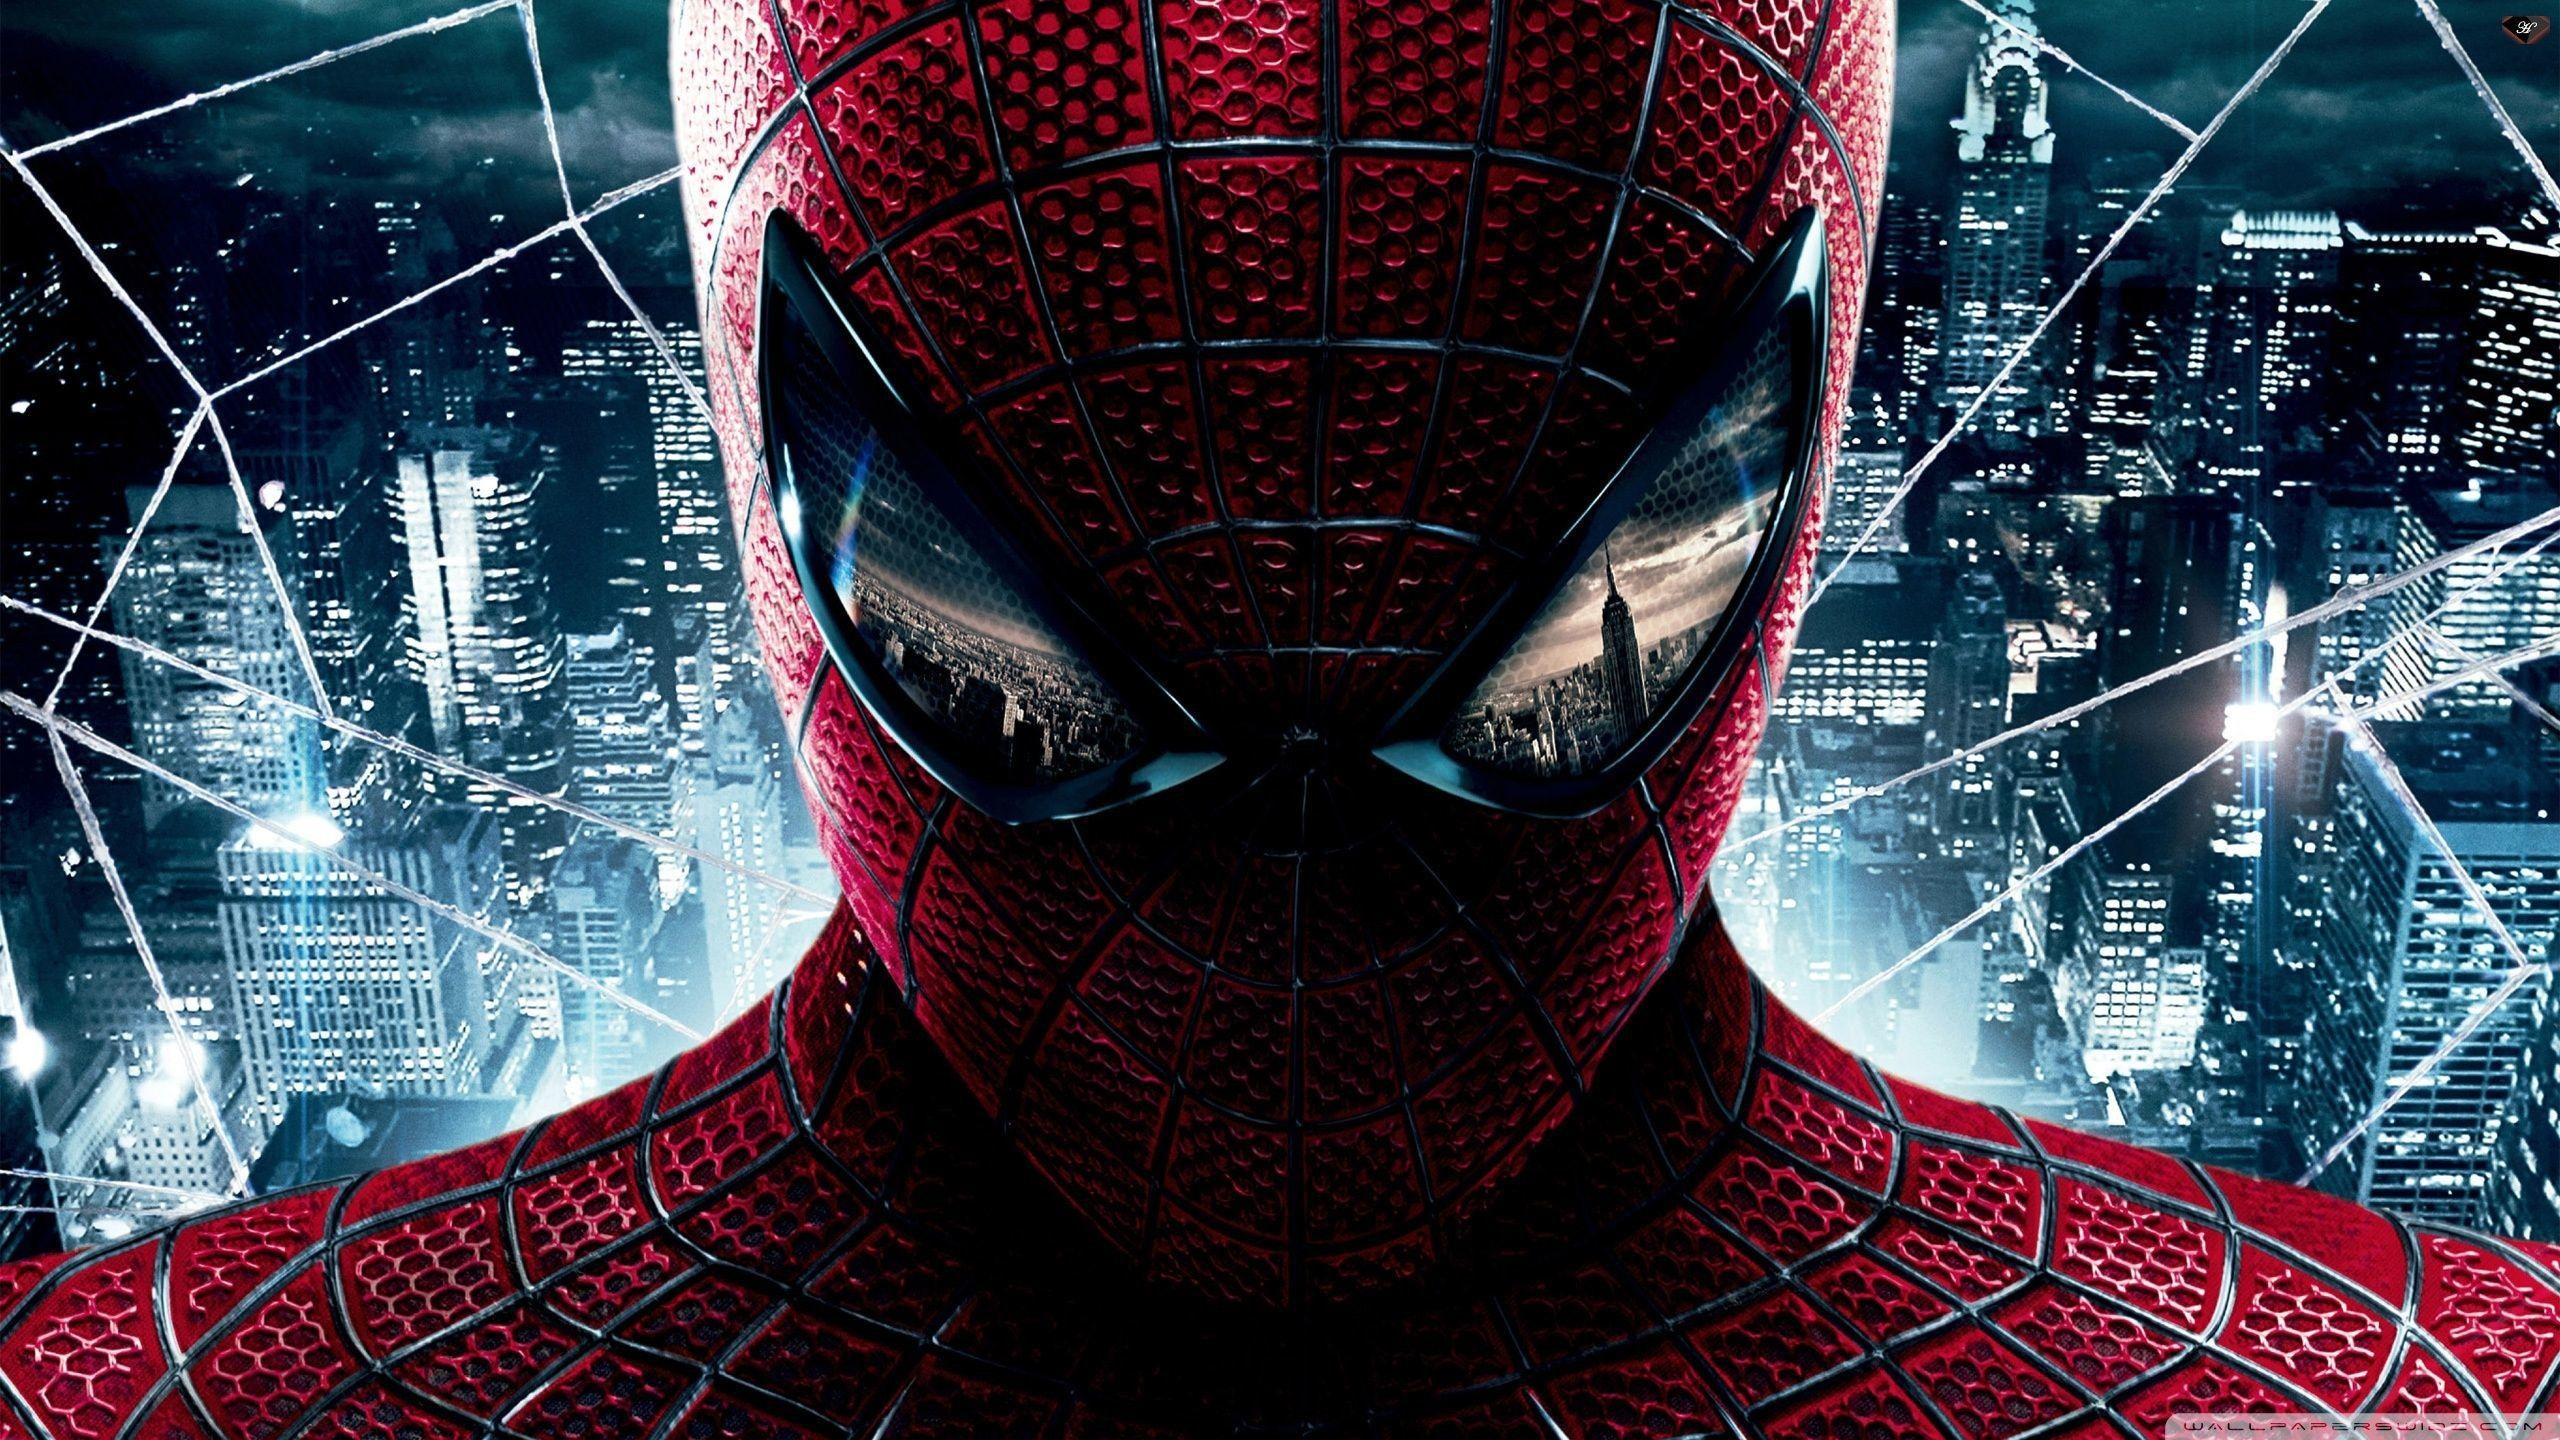 Spider Man 4 Wallpapers Top Free Spider Man 4 Backgrounds Wallpaperaccess